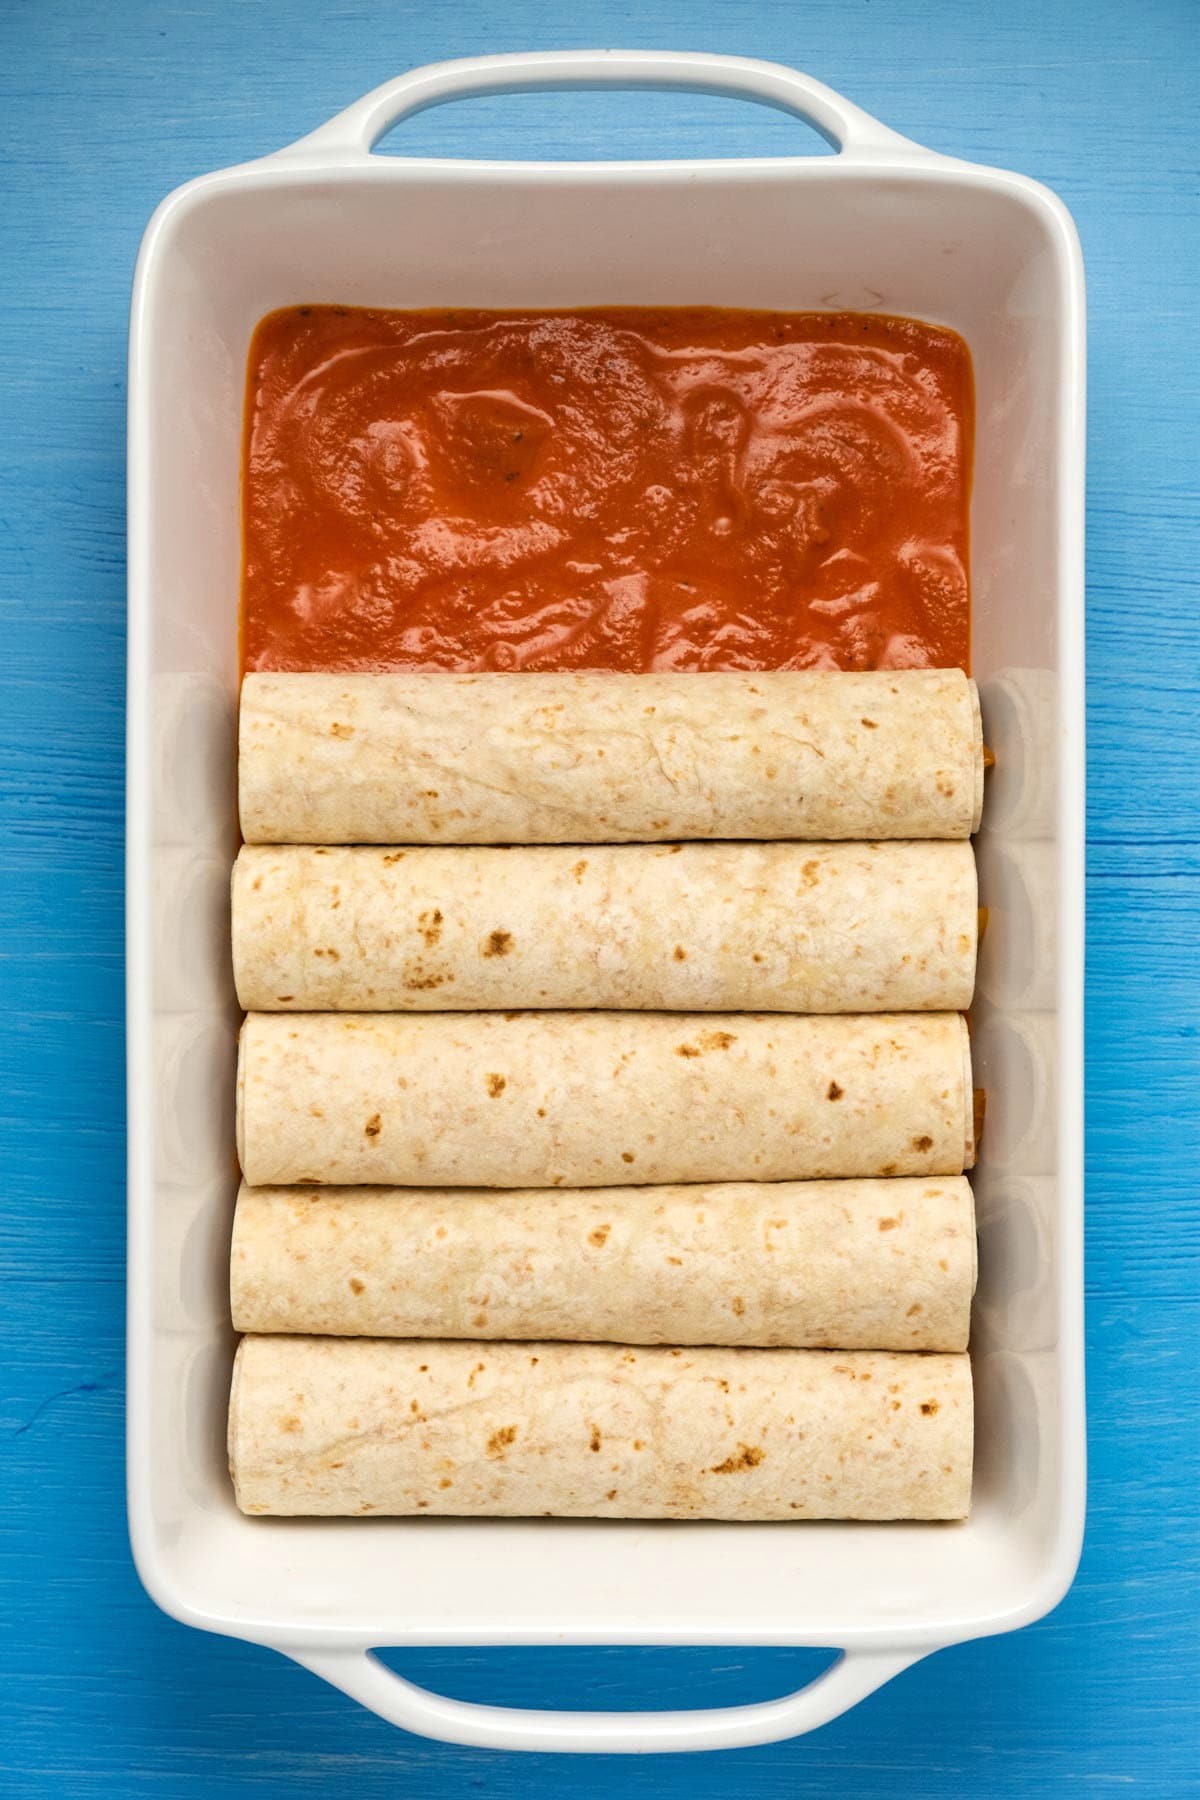 Rolled tortillas in a white baking dish.